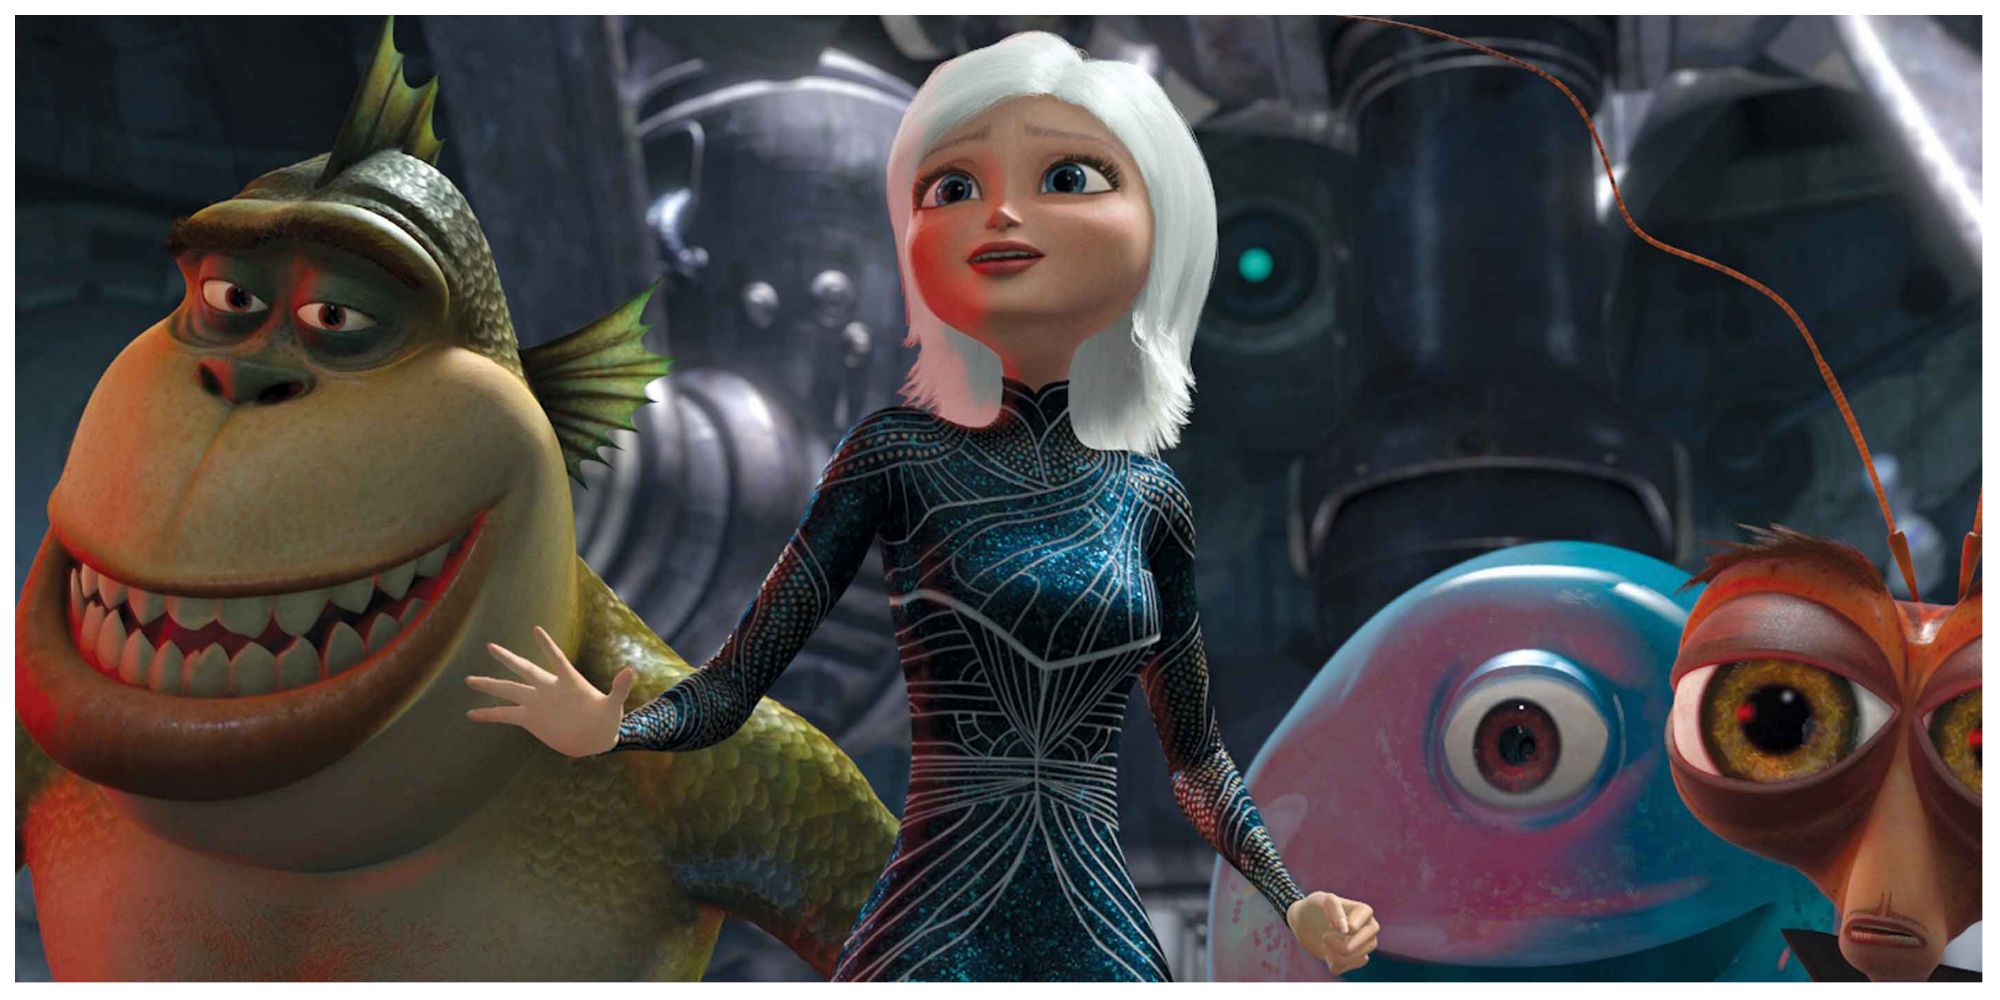 Susan Murphy and the rest of the monsters in DreamWorks' Monsters vs. Aliens